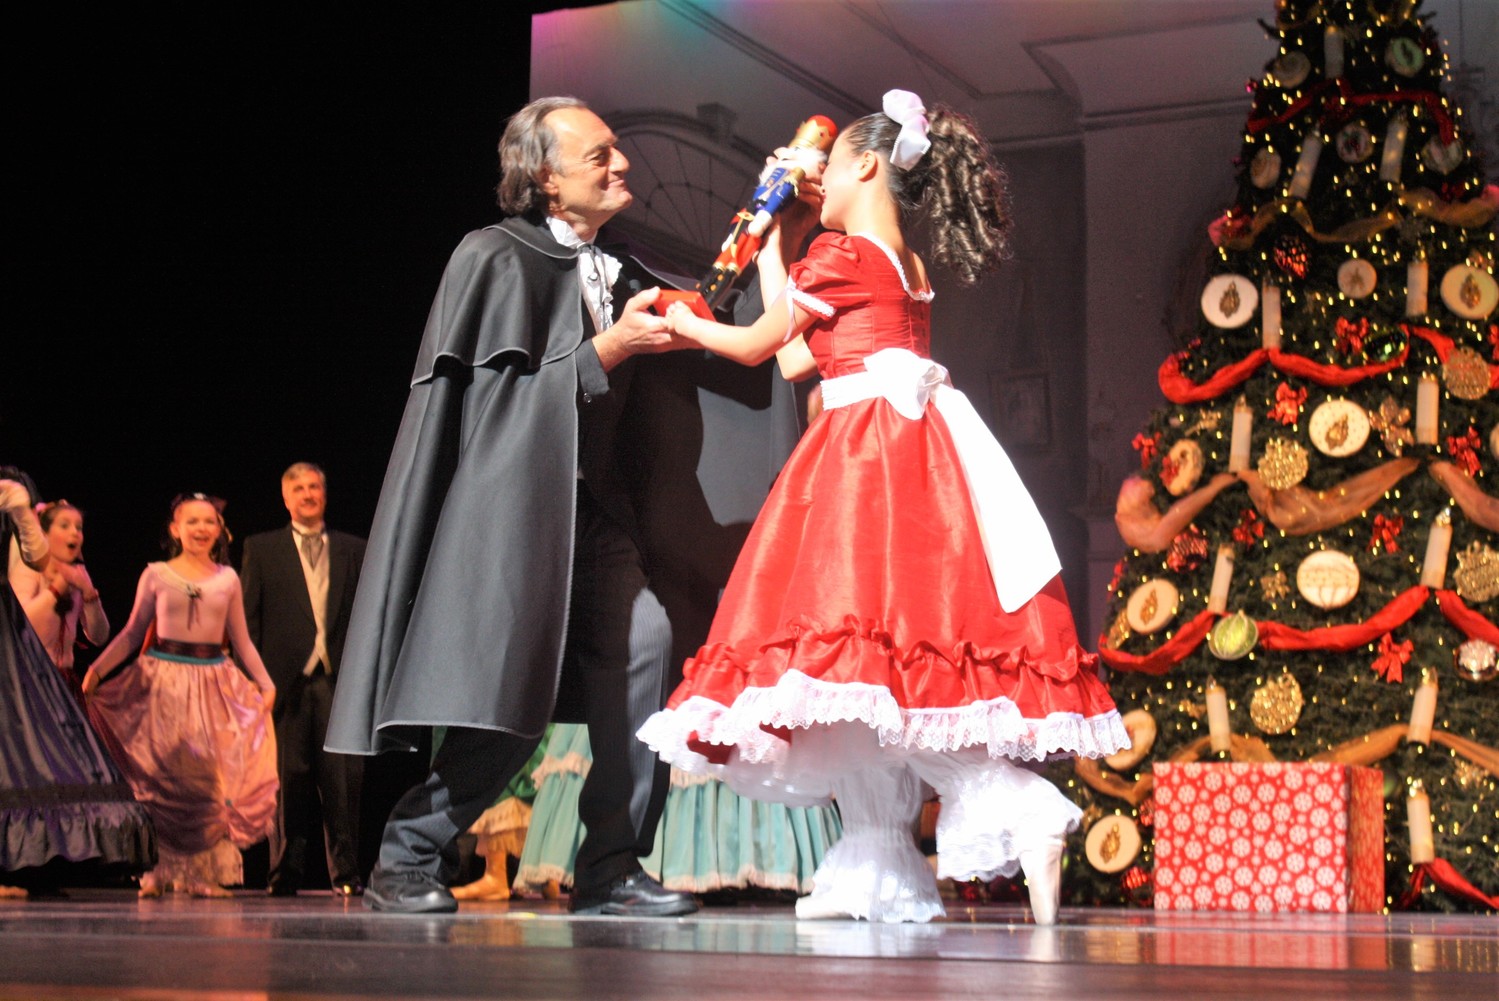 Clara, portrayed by Ellie McCary, receives a nutcracker doll from her Uncle Drosselmeyer, played by Anthony Egeln Sr.